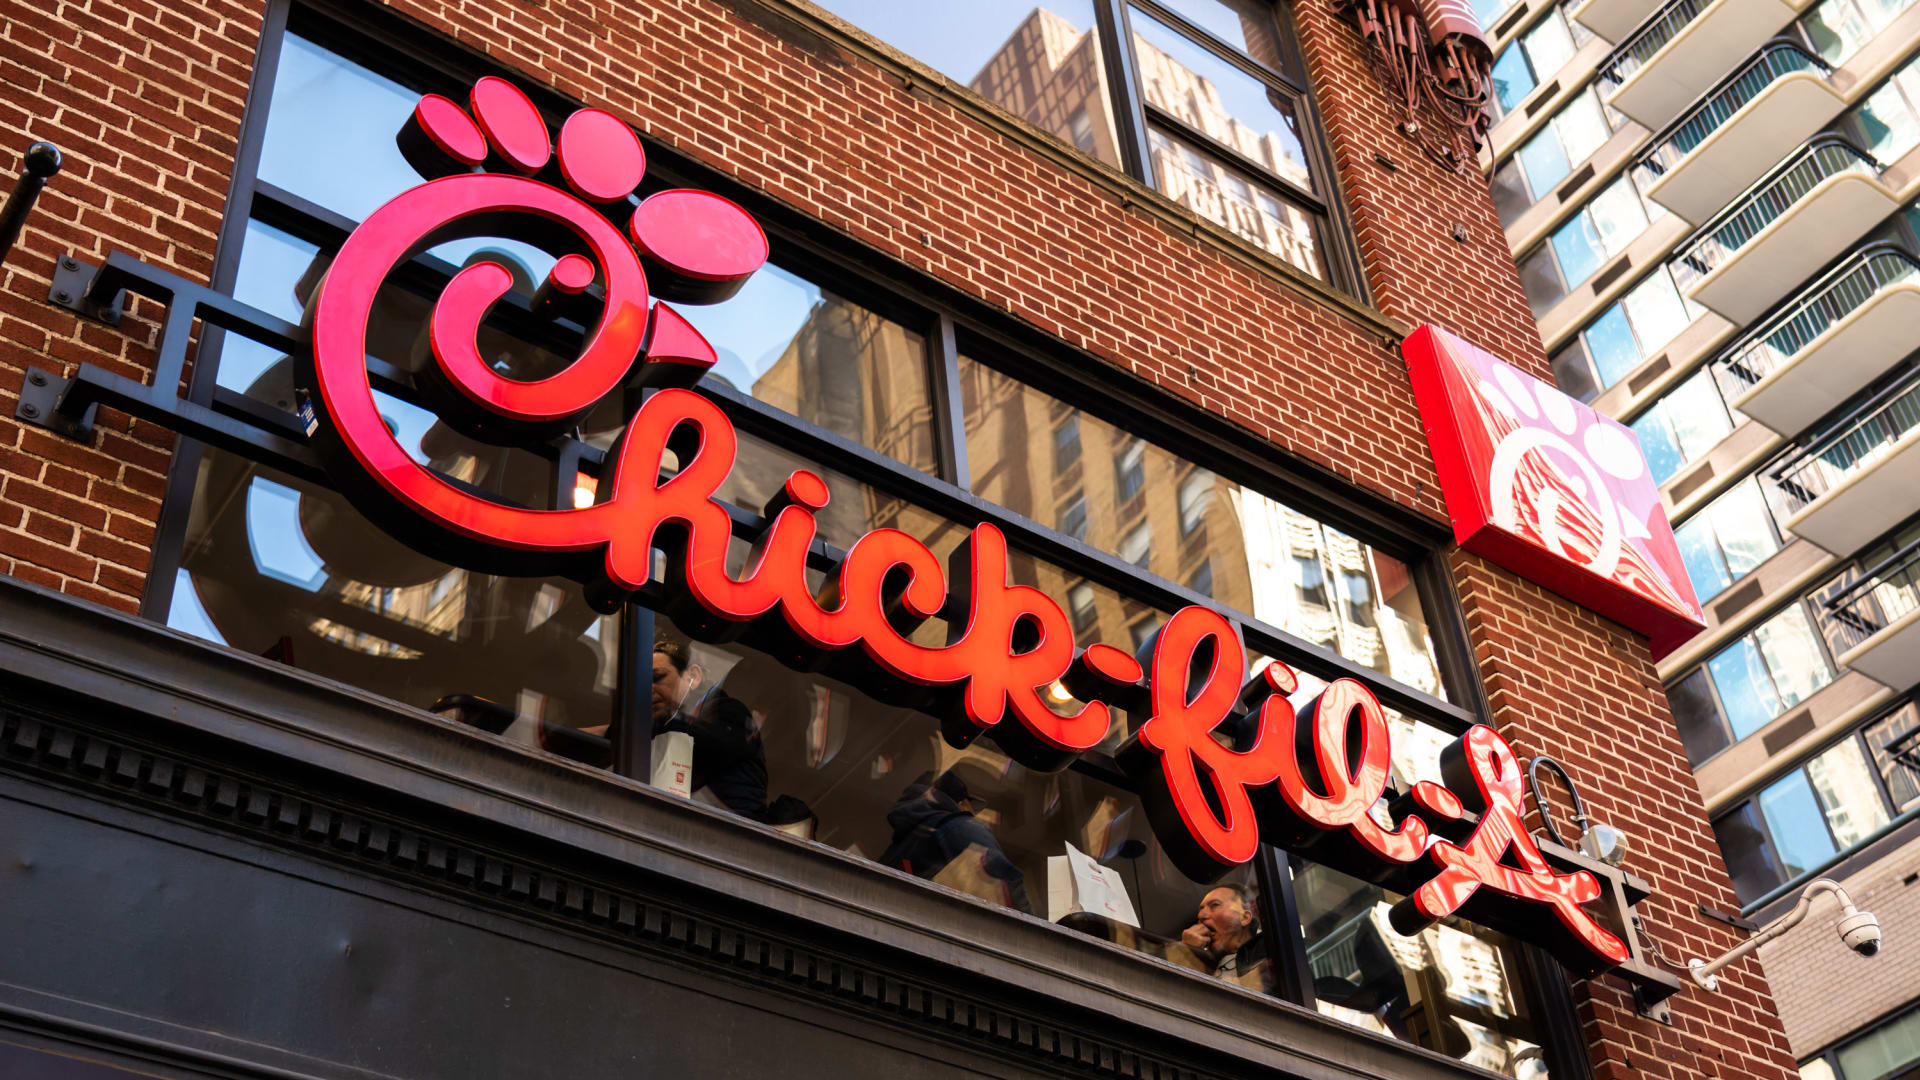 A Chick-fil-A restaurant in New York City.